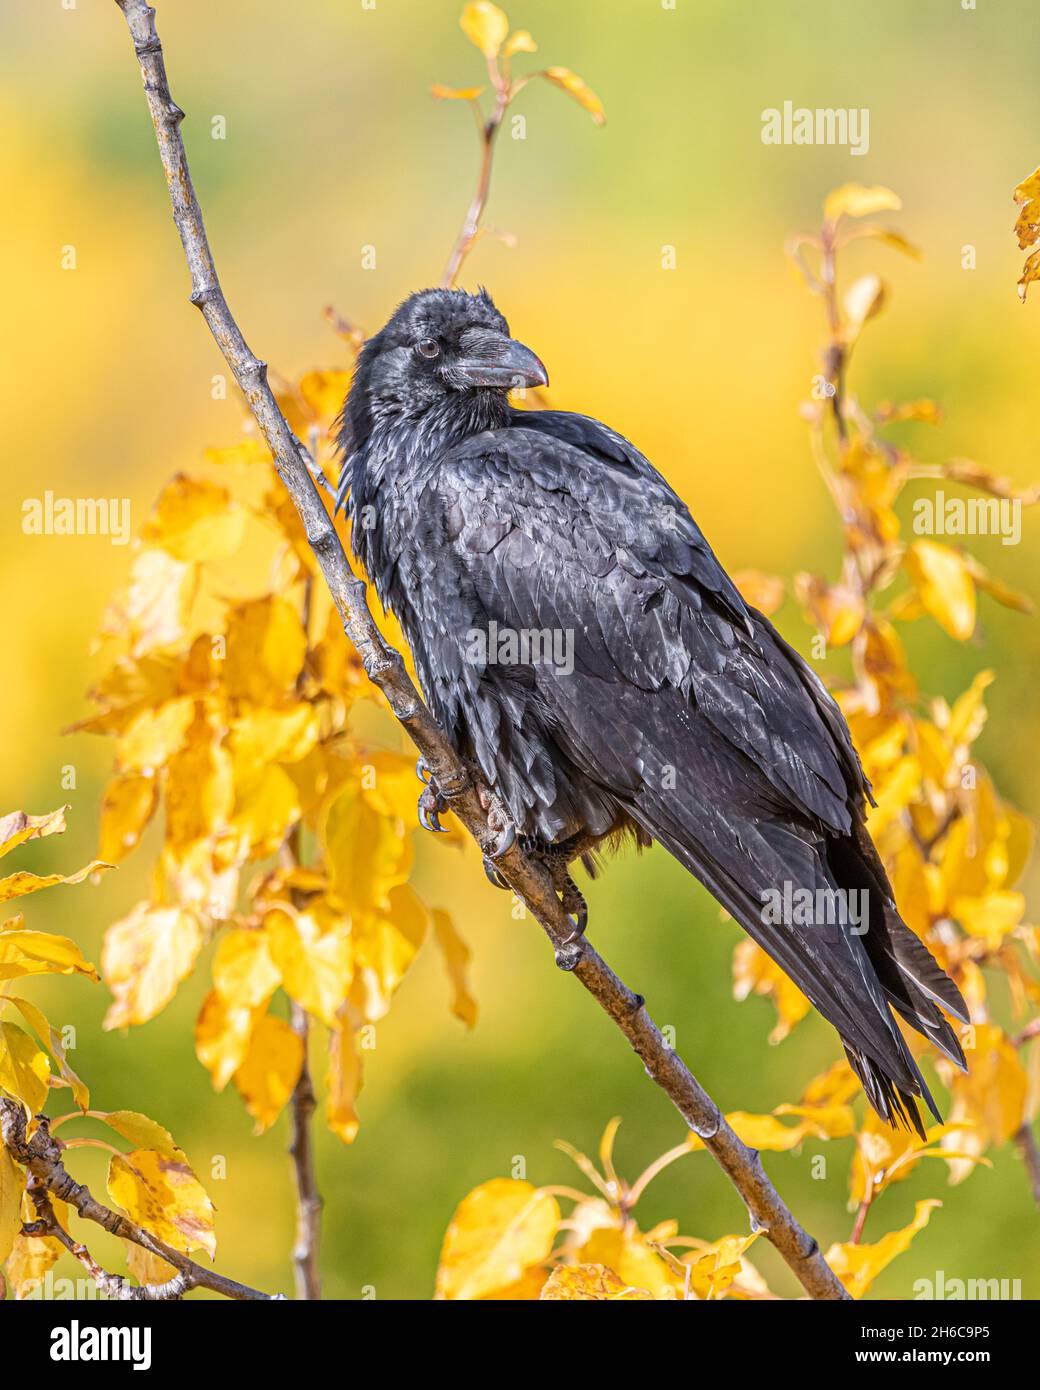 Healthy Raven seen in the wild with stunning, shiny coat and yellow, fall, autumn leaves with blue sky background. Stock Photo